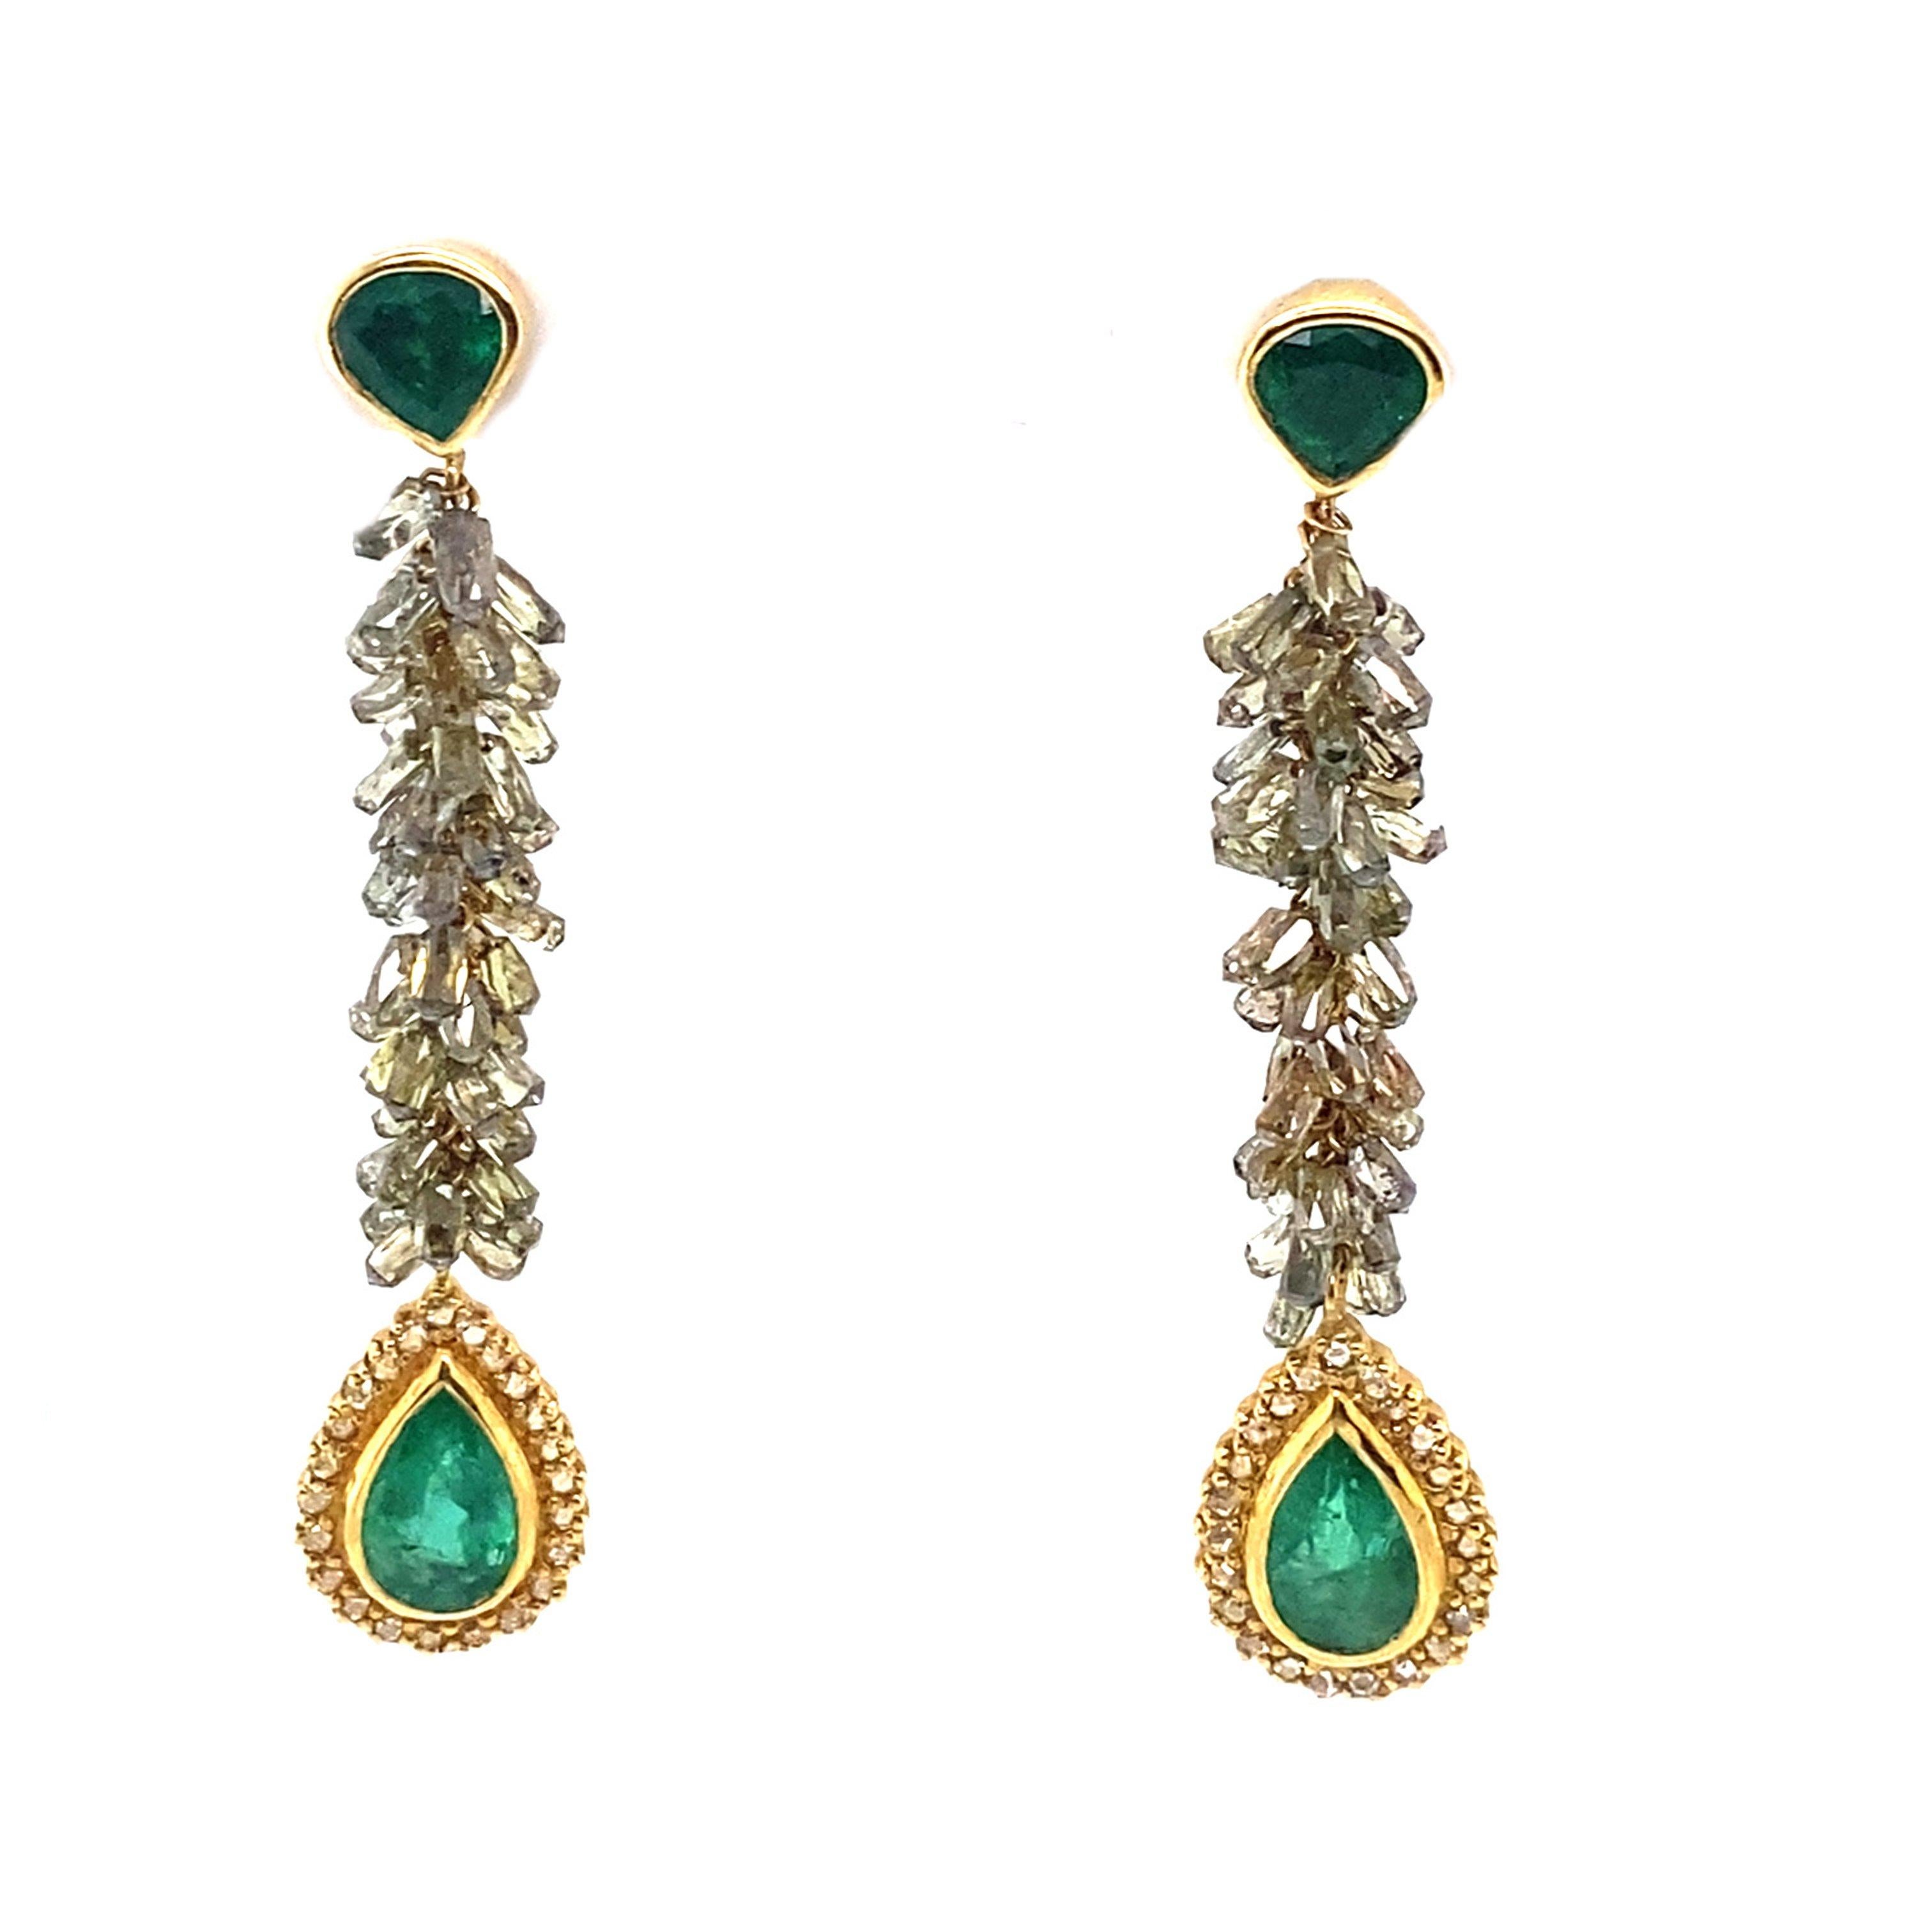 Luminosity Earrings Set in 20 Karat Yellow Gold with 2.65 Carat Brown Diamond Beads and 7.46 Carat Pear Shaped Emeralds. These Earrings Are Set with 0.27 Carat Pure Quality Rose-Cut Diamonds As Well.